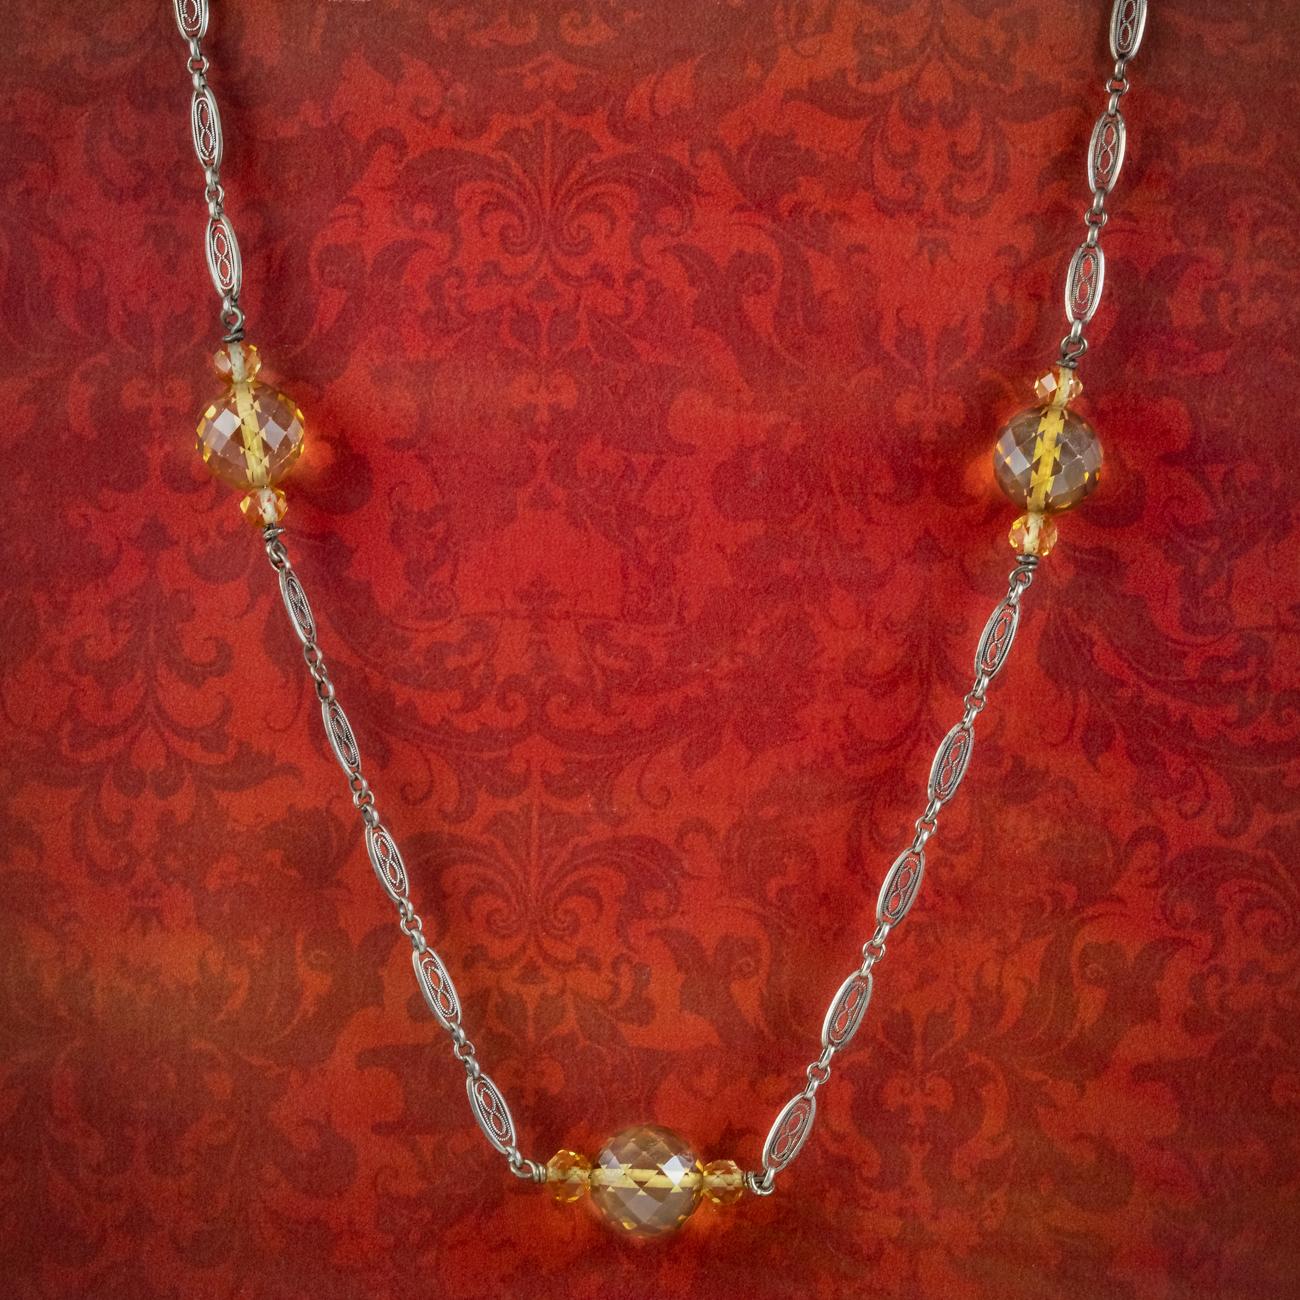 A marvellous antique Edwardian chain adorned with five large briolette cut citrine beads with smaller citrines set on either side. They have been cut with an array of diamond-shaped facets that glisten beautifully when they catch the light and